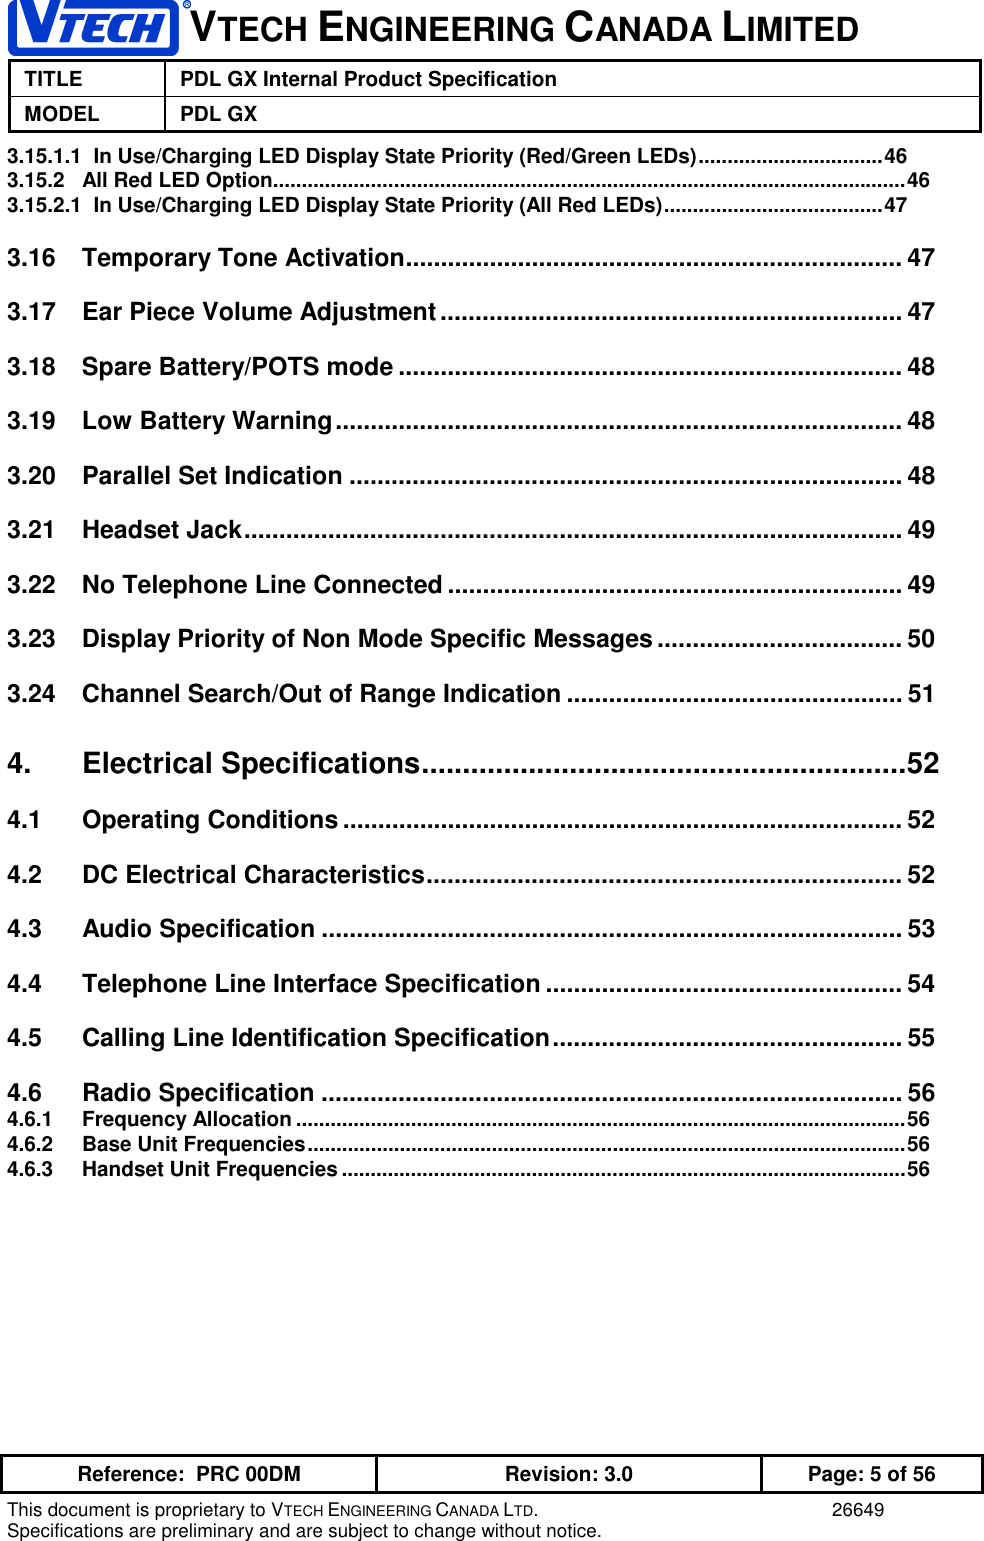 VTECH ENGINEERING CANADA LIMITEDTITLE PDL GX Internal Product SpecificationMODEL PDL GXReference:  PRC 00DM Revision: 3.0 Page: 5 of 56This document is proprietary to VTECH ENGINEERING CANADA LTD. 26649Specifications are preliminary and are subject to change without notice.3.15.1.1  In Use/Charging LED Display State Priority (Red/Green LEDs)................................463.15.2 All Red LED Option..............................................................................................................463.15.2.1  In Use/Charging LED Display State Priority (All Red LEDs)......................................473.16 Temporary Tone Activation....................................................................... 473.17 Ear Piece Volume Adjustment.................................................................. 473.18 Spare Battery/POTS mode ........................................................................ 483.19 Low Battery Warning................................................................................. 483.20 Parallel Set Indication ............................................................................... 483.21 Headset Jack.............................................................................................. 493.22 No Telephone Line Connected ................................................................. 493.23 Display Priority of Non Mode Specific Messages ................................... 503.24 Channel Search/Out of Range Indication ................................................ 514. Electrical Specifications...........................................................524.1 Operating Conditions ................................................................................ 524.2 DC Electrical Characteristics.................................................................... 524.3 Audio Specification ................................................................................... 534.4 Telephone Line Interface Specification ................................................... 544.5 Calling Line Identification Specification.................................................. 554.6 Radio Specification ................................................................................... 564.6.1 Frequency Allocation ..........................................................................................................564.6.2 Base Unit Frequencies........................................................................................................564.6.3 Handset Unit Frequencies ..................................................................................................56